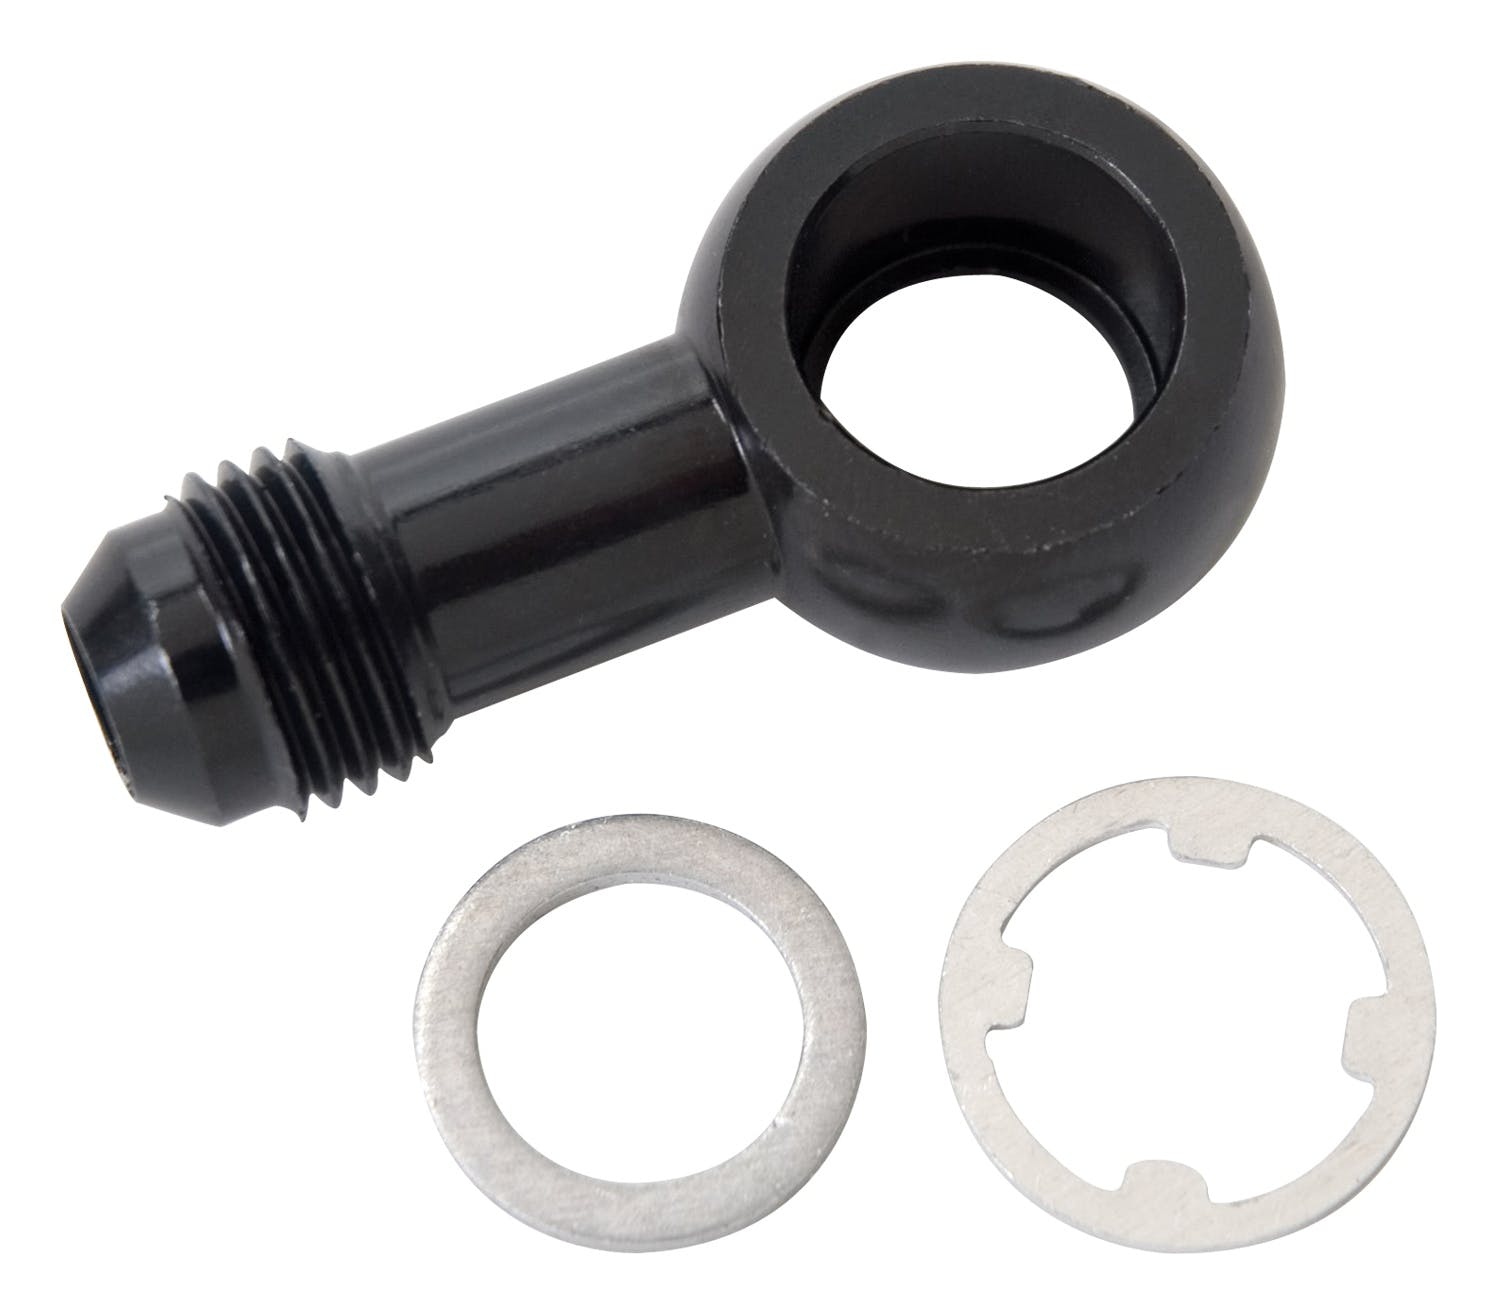 Russell 640923 Honda Banjo W/ #6 An Male Flare For Civics and Integras W/ Fuel Pressure Damp